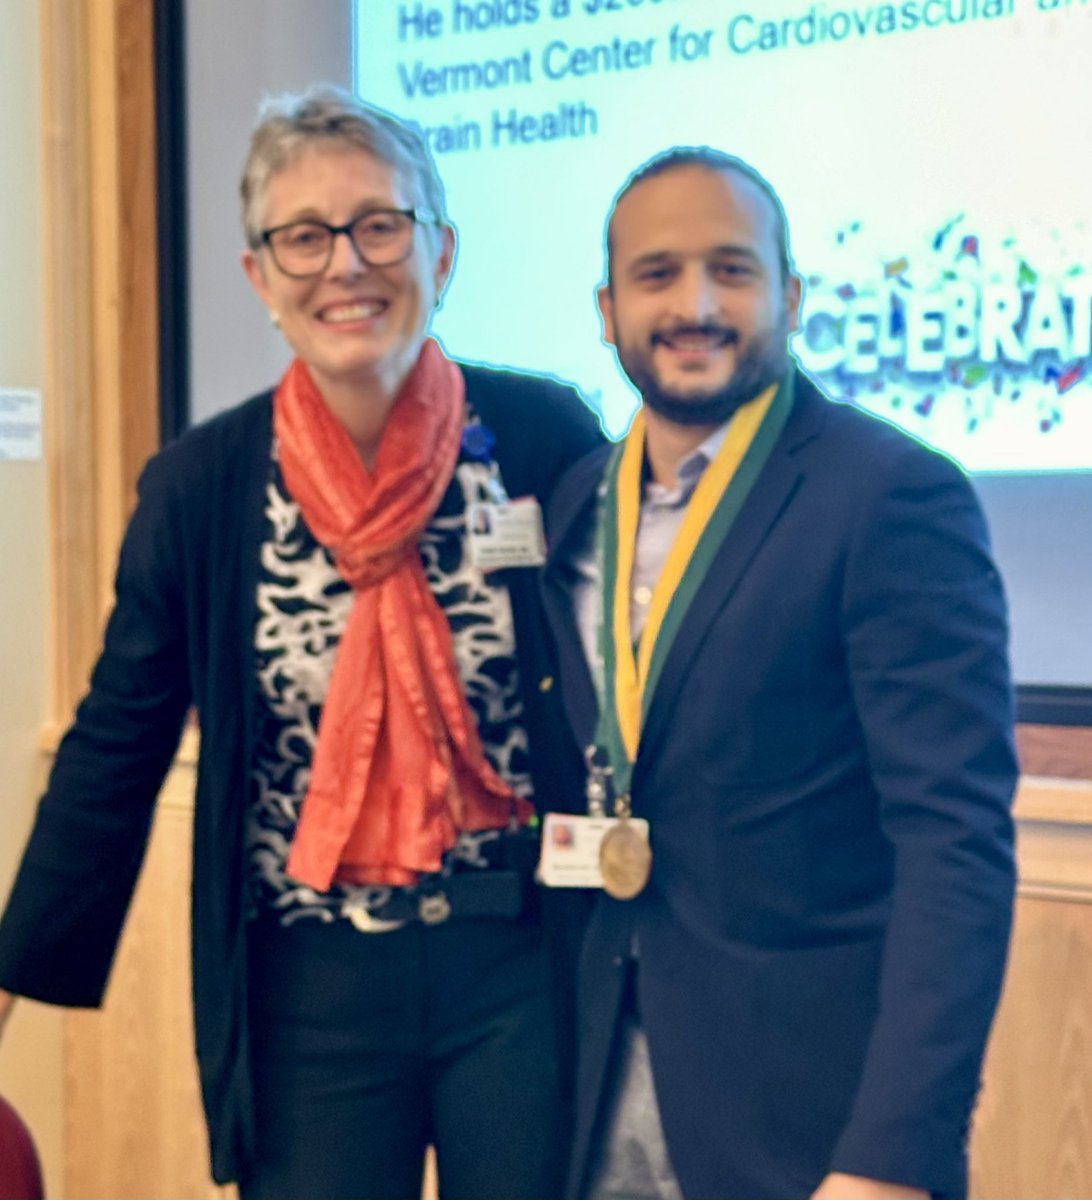 Time for some bling, and💰💰! Congratulations to @Mansourgergi, the new @uvmvermont Green & Gold Early Career Professor of our Dept of Medicine! He is studying hospital acquired bleeding in cancer patients, a critical topic. @UVMLarnerMed @UVMcancercenter